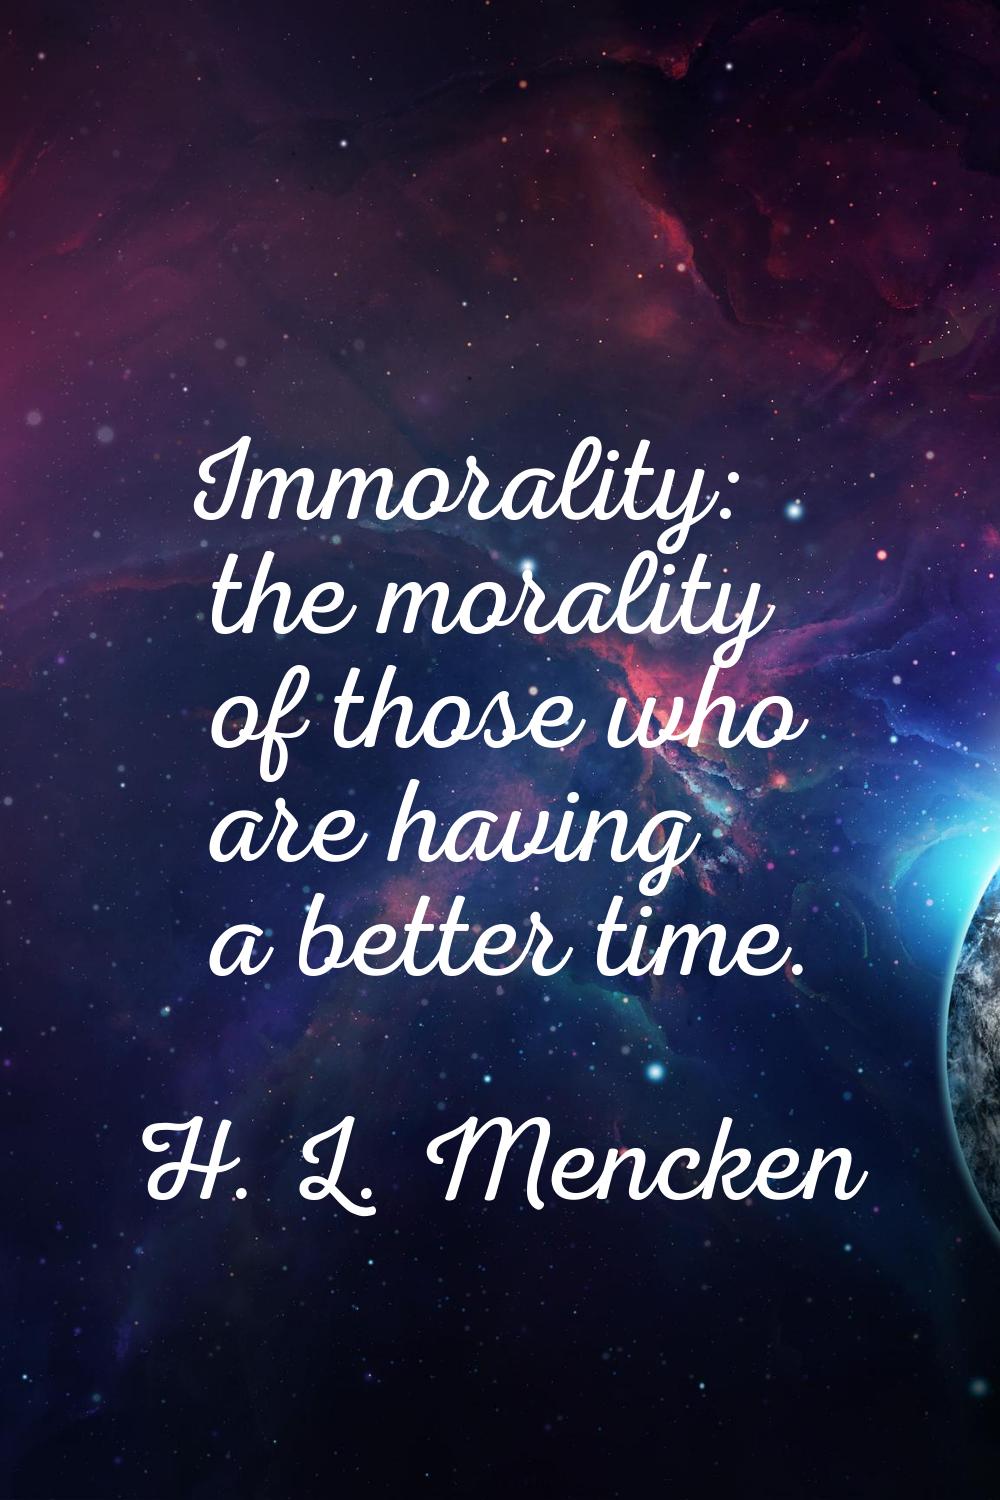 Immorality: the morality of those who are having a better time.